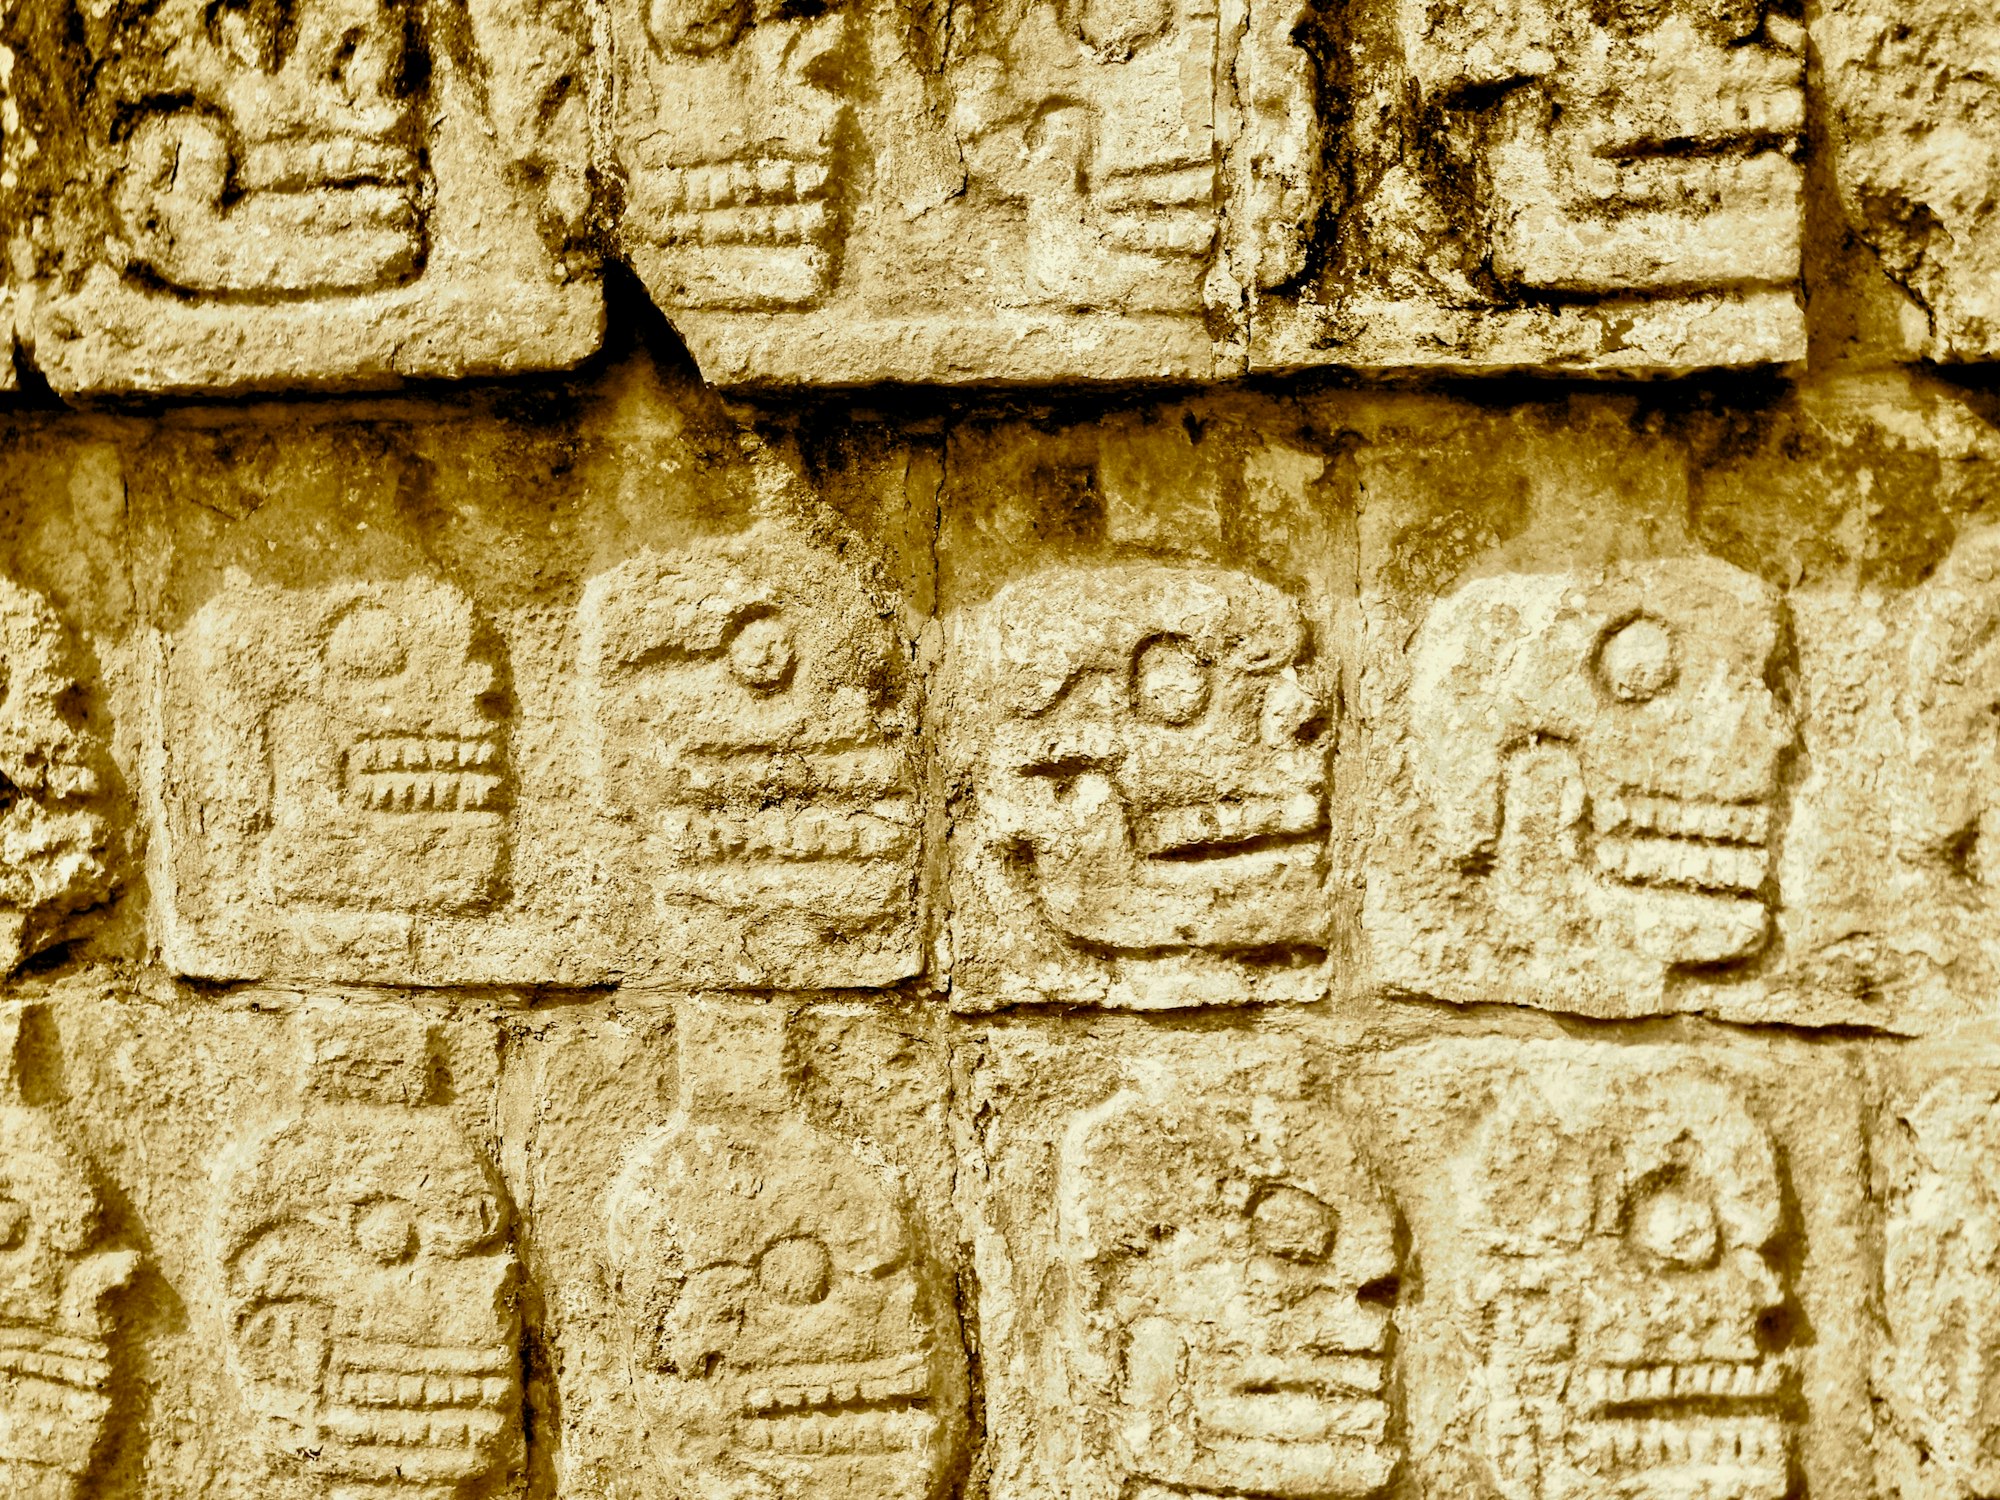 Archaeologists reveal remains of Mayan city X'baatún